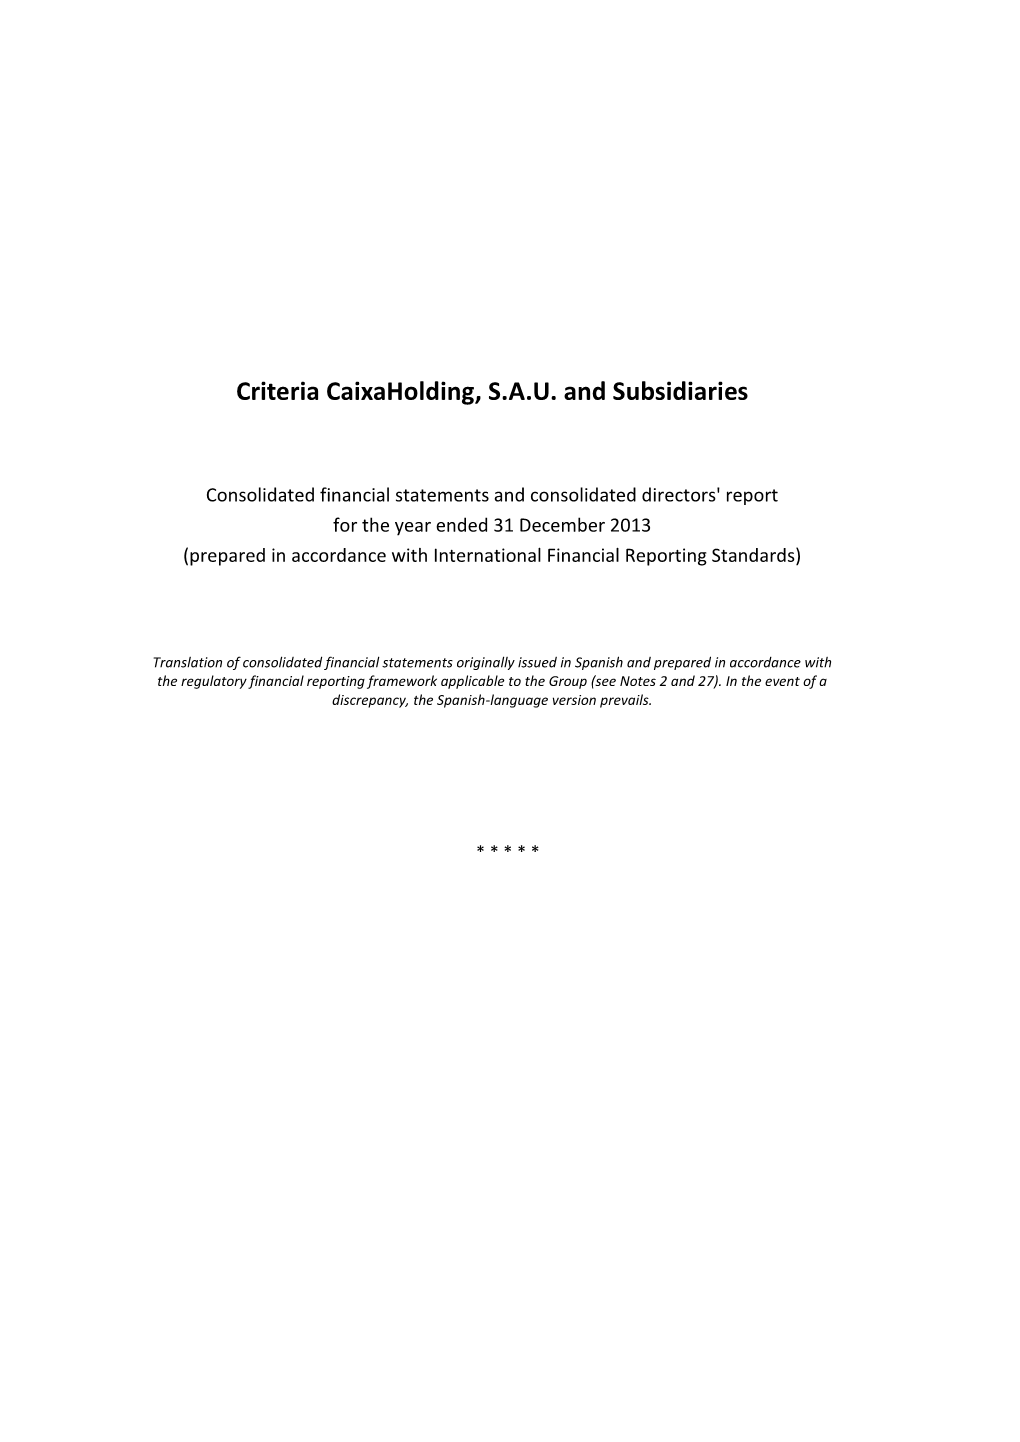 Consolidated Financial Statements and Consolidated